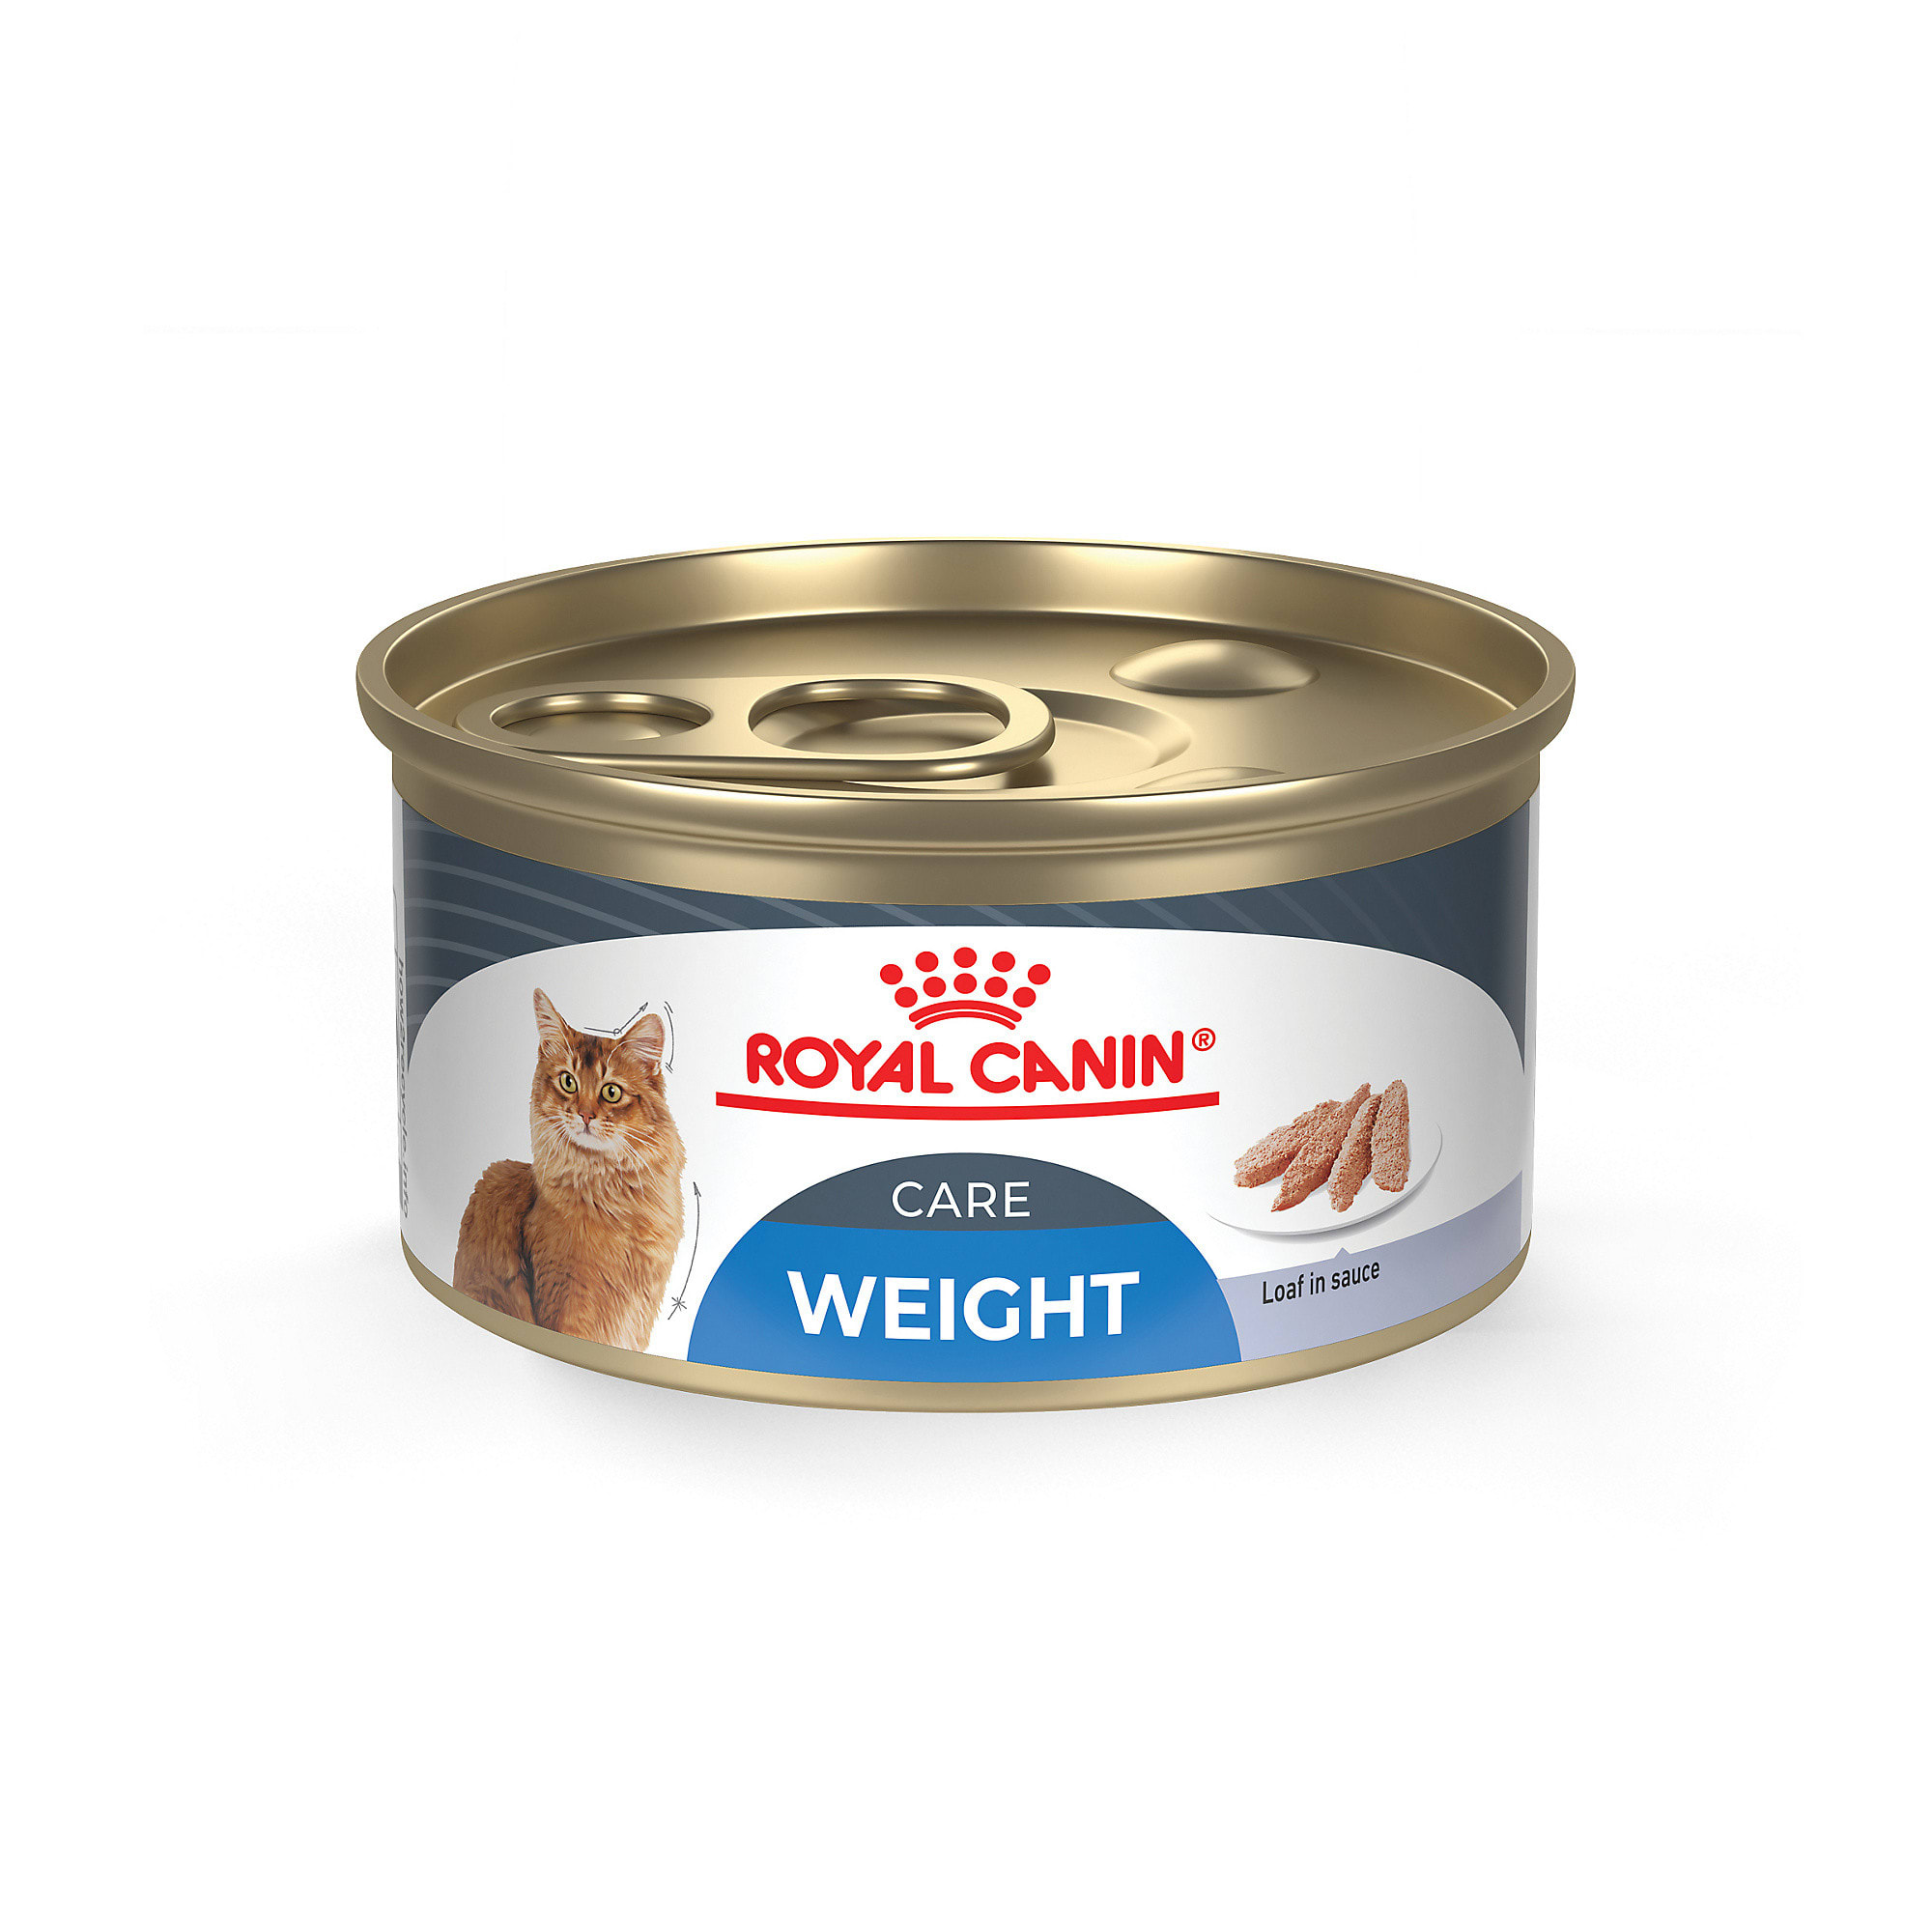 Royal Canin Feline Weight Care Loaf in Sauce Canned Adult Wet Cat Food, 5.1 oz., Case of 24 | Canned Cat